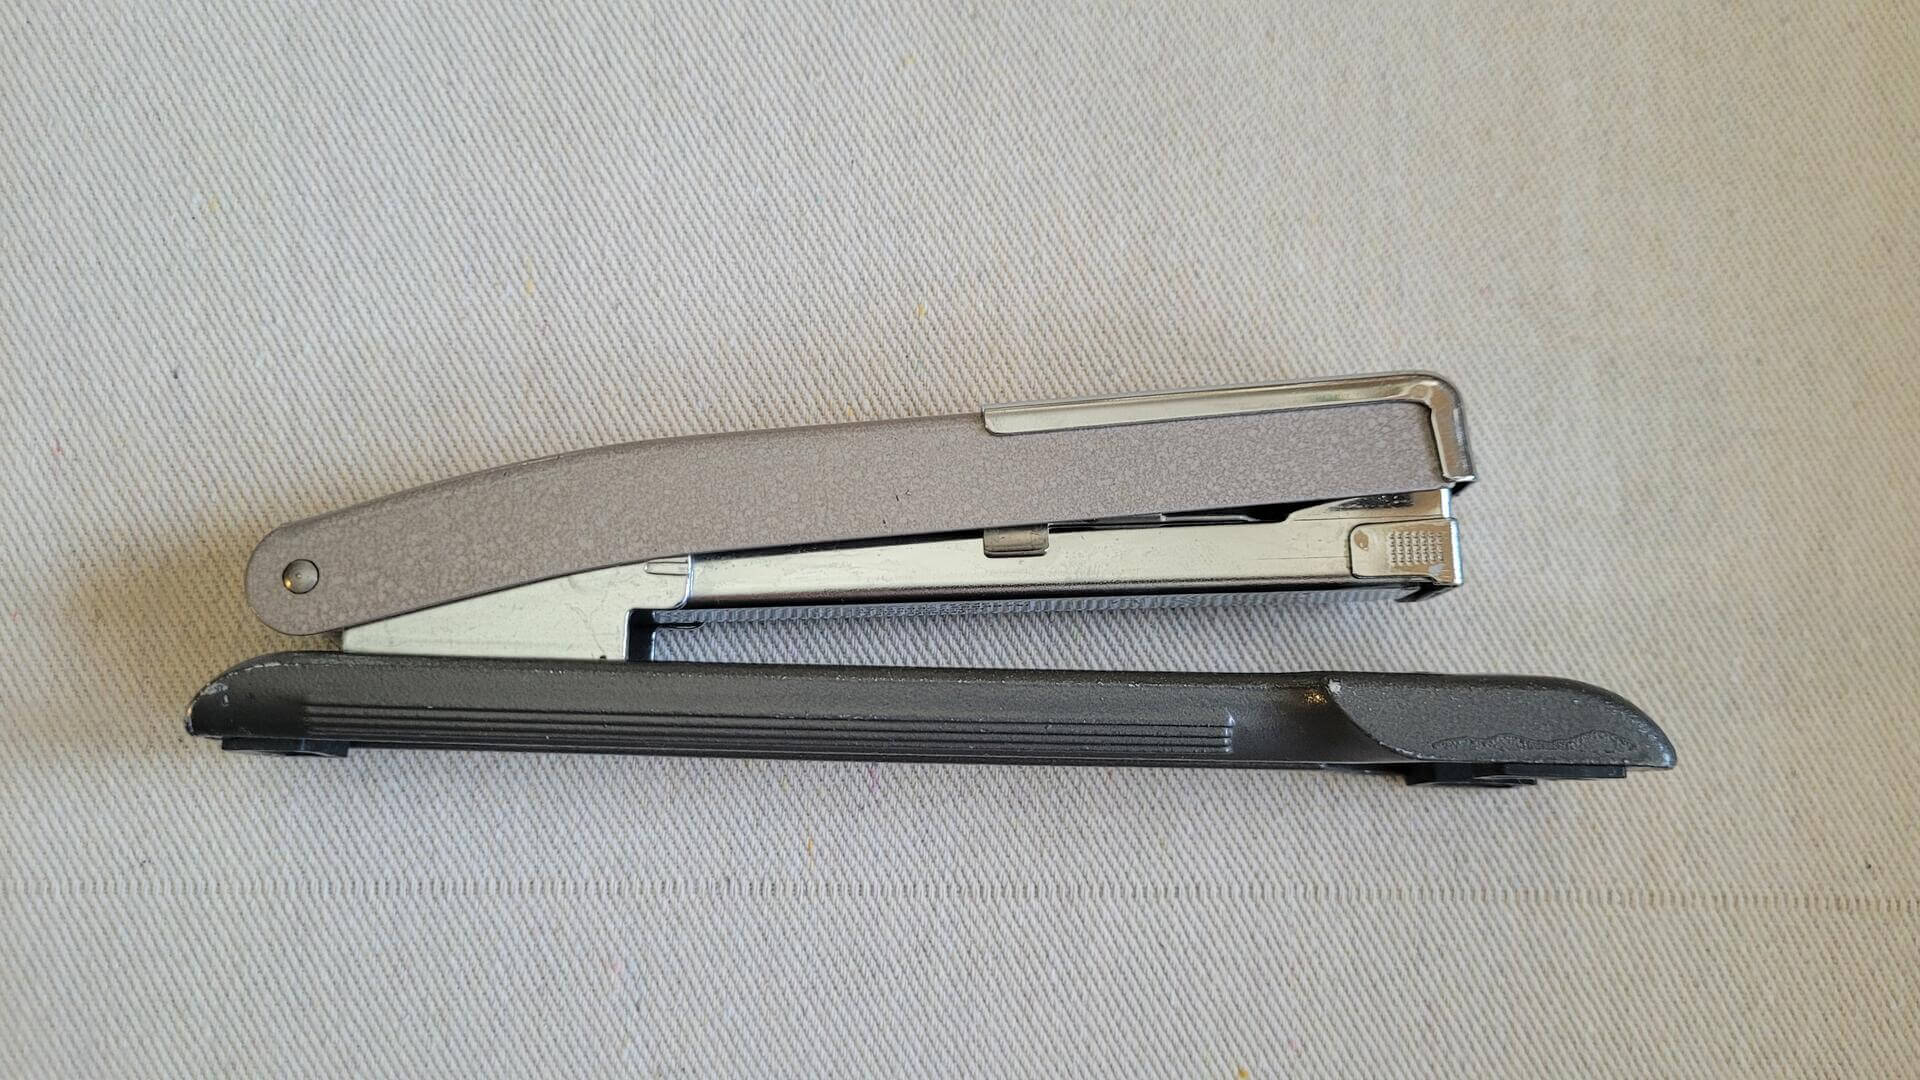 Apsco 16 paper stapler Isaberg AB Hestra mid century design. Vintage made in Sweden collectible mid century stationary and office equipment tool